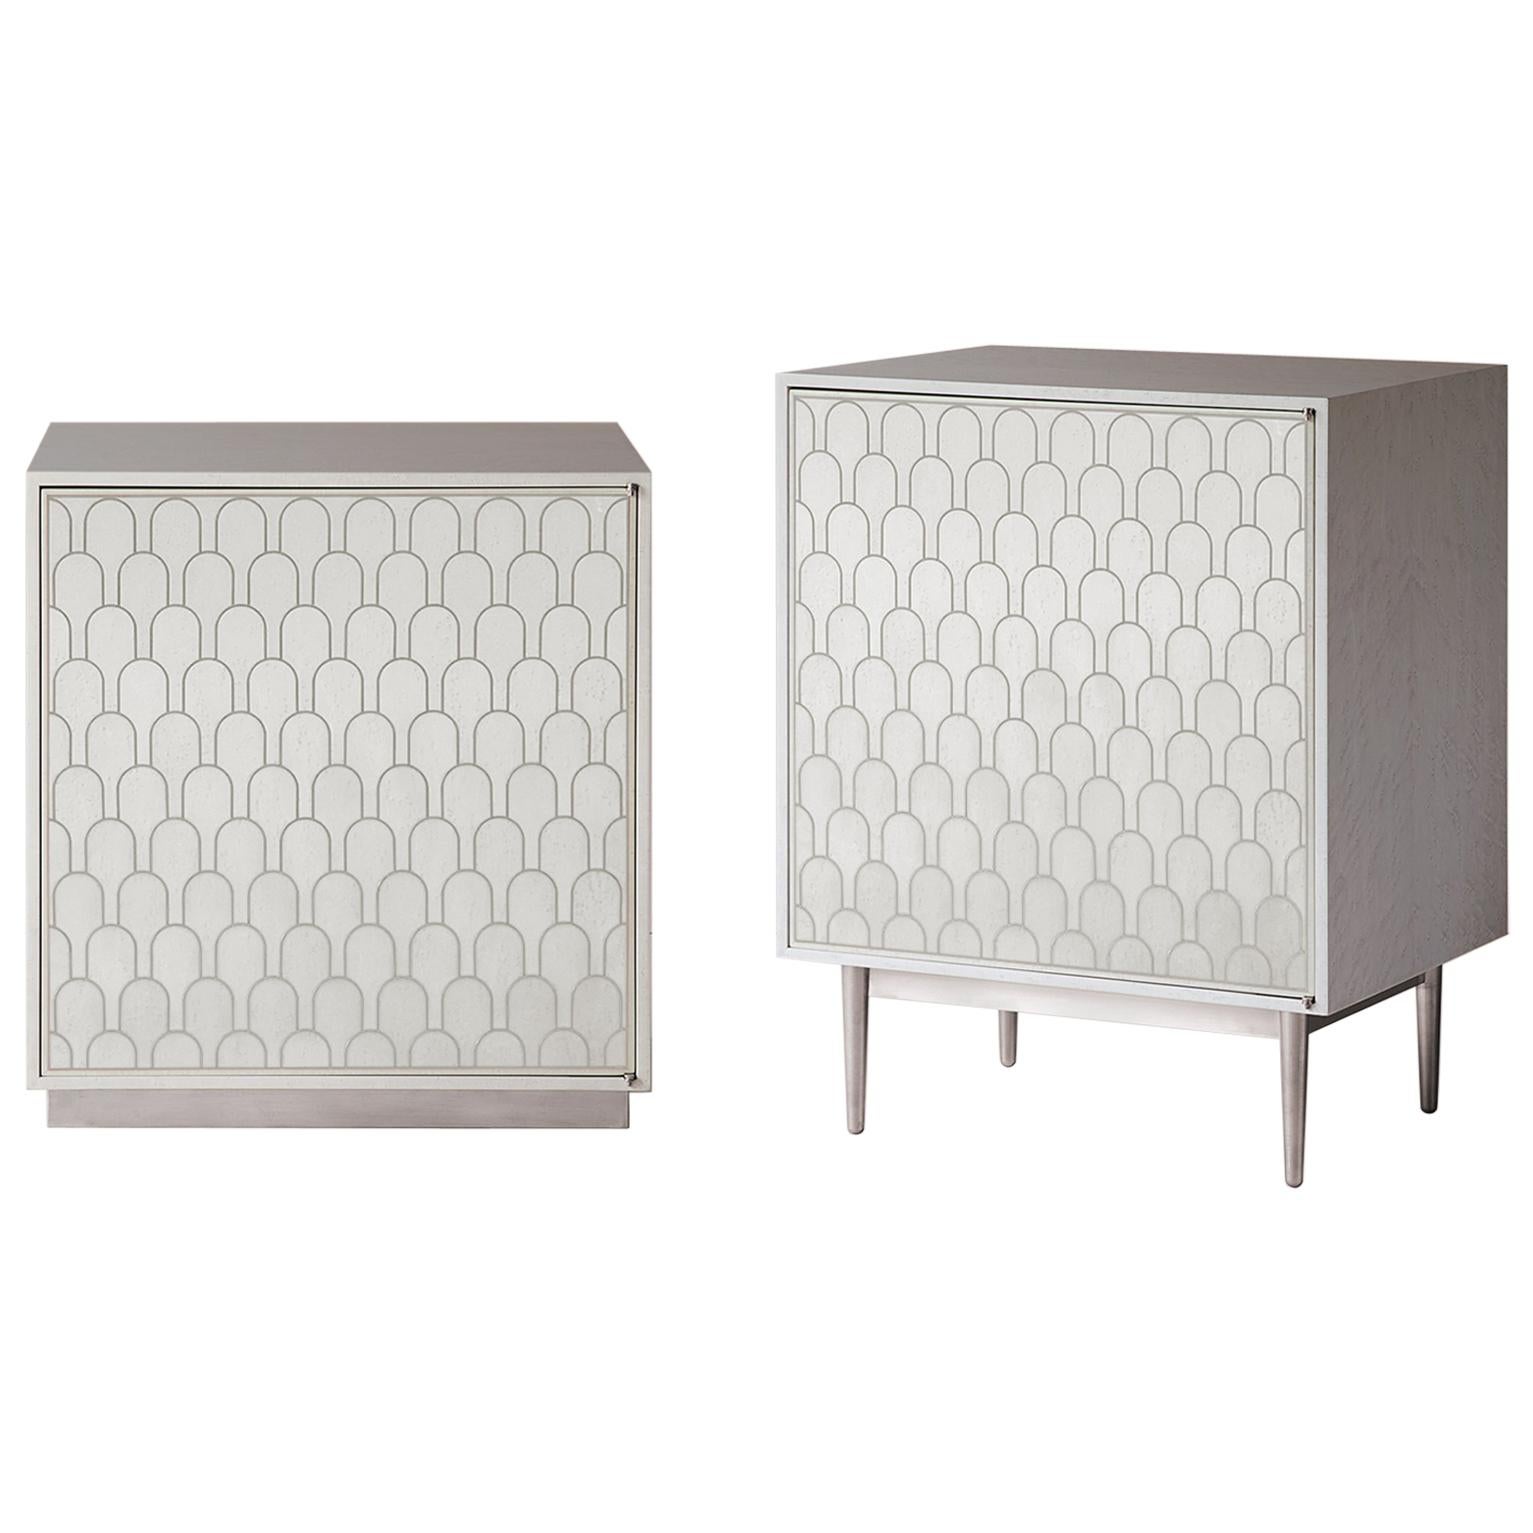 Bethan Gray Maxi Nizwa One-Door Bedside Table in White and Nickel